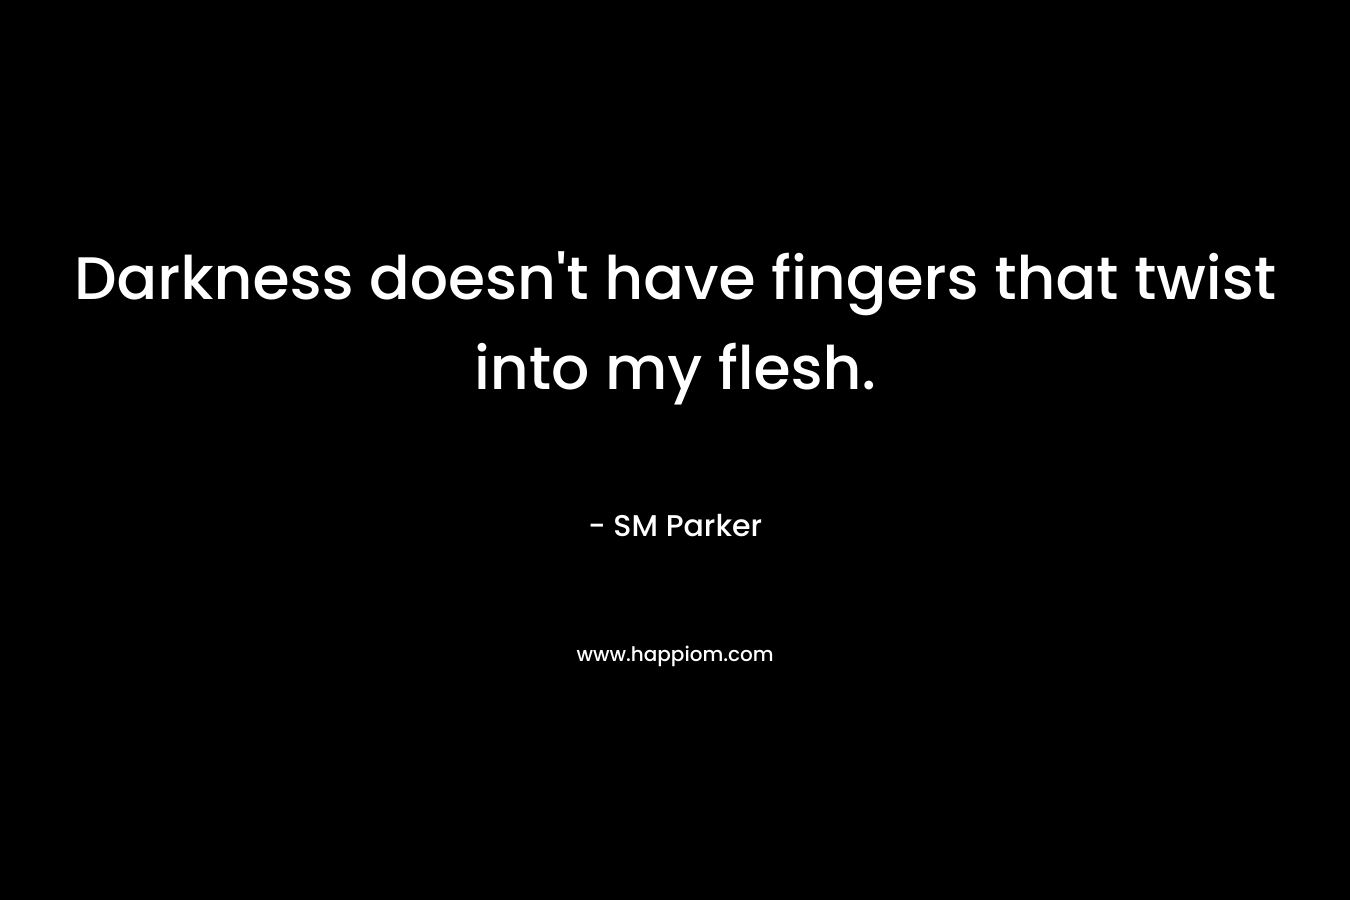 Darkness doesn't have fingers that twist into my flesh.